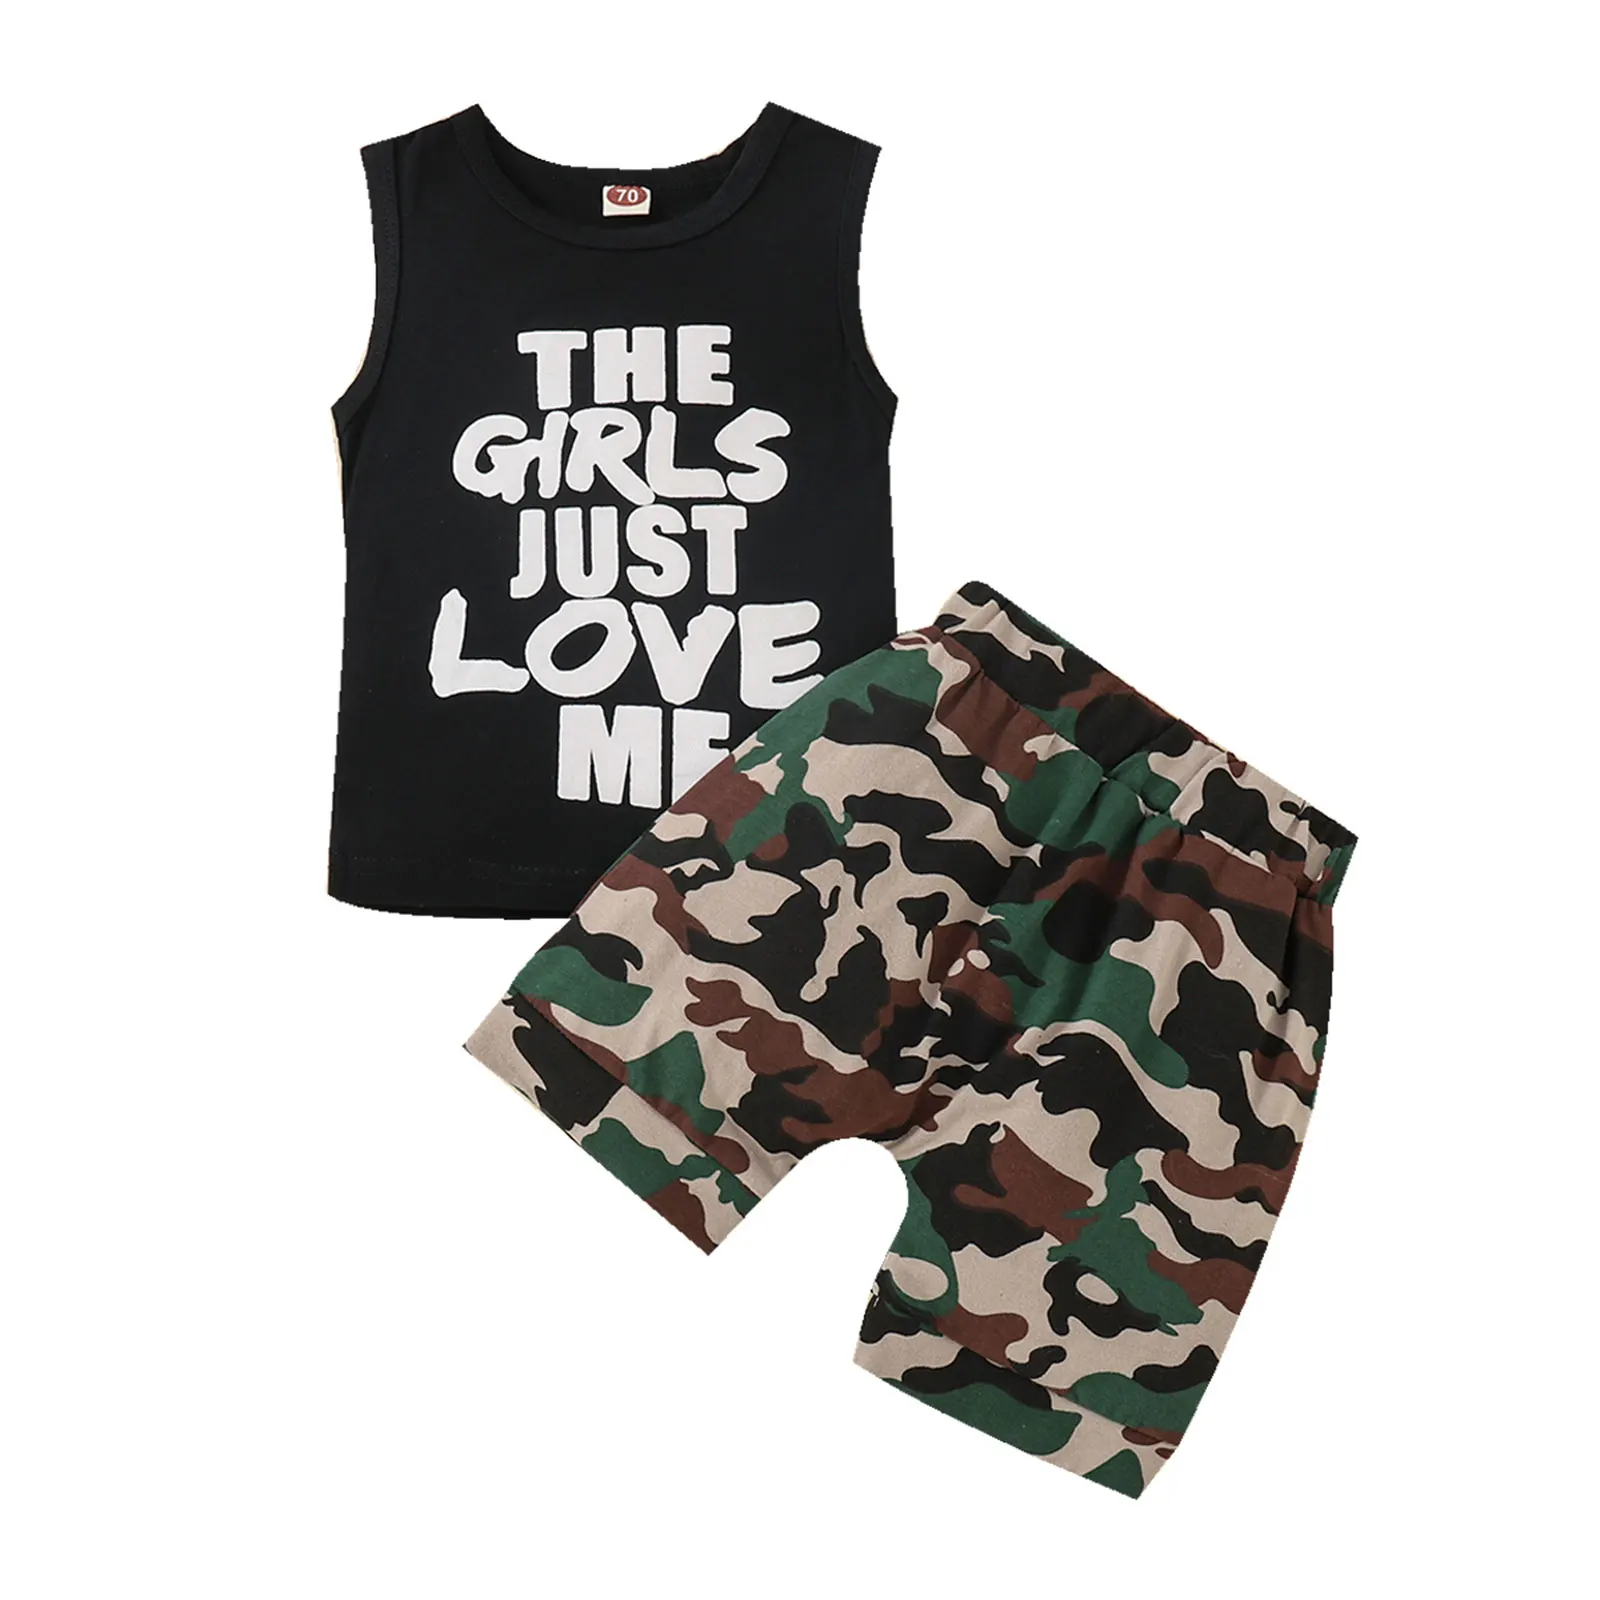 Newest Arrival Little Boys Girls Fashion Summer Suit Infant Baby Letter Sleeveless Tops+Camouflage Short Pants Sets for 6M-4Y new baby clothing set	 Baby Clothing Set